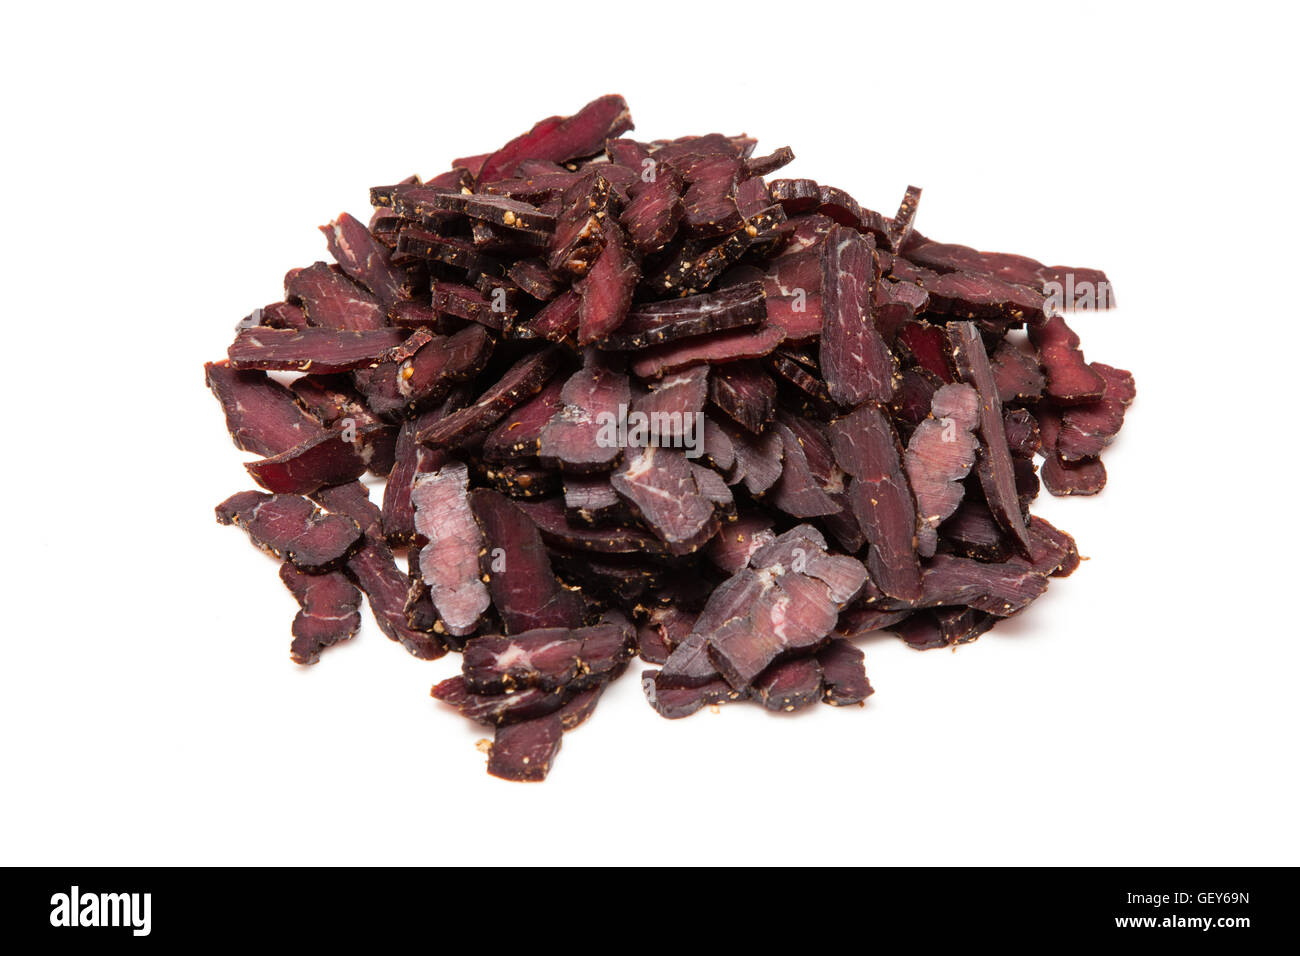 Sliced biltong, Biltong is a South African spiced beef jerky. Stock Photo